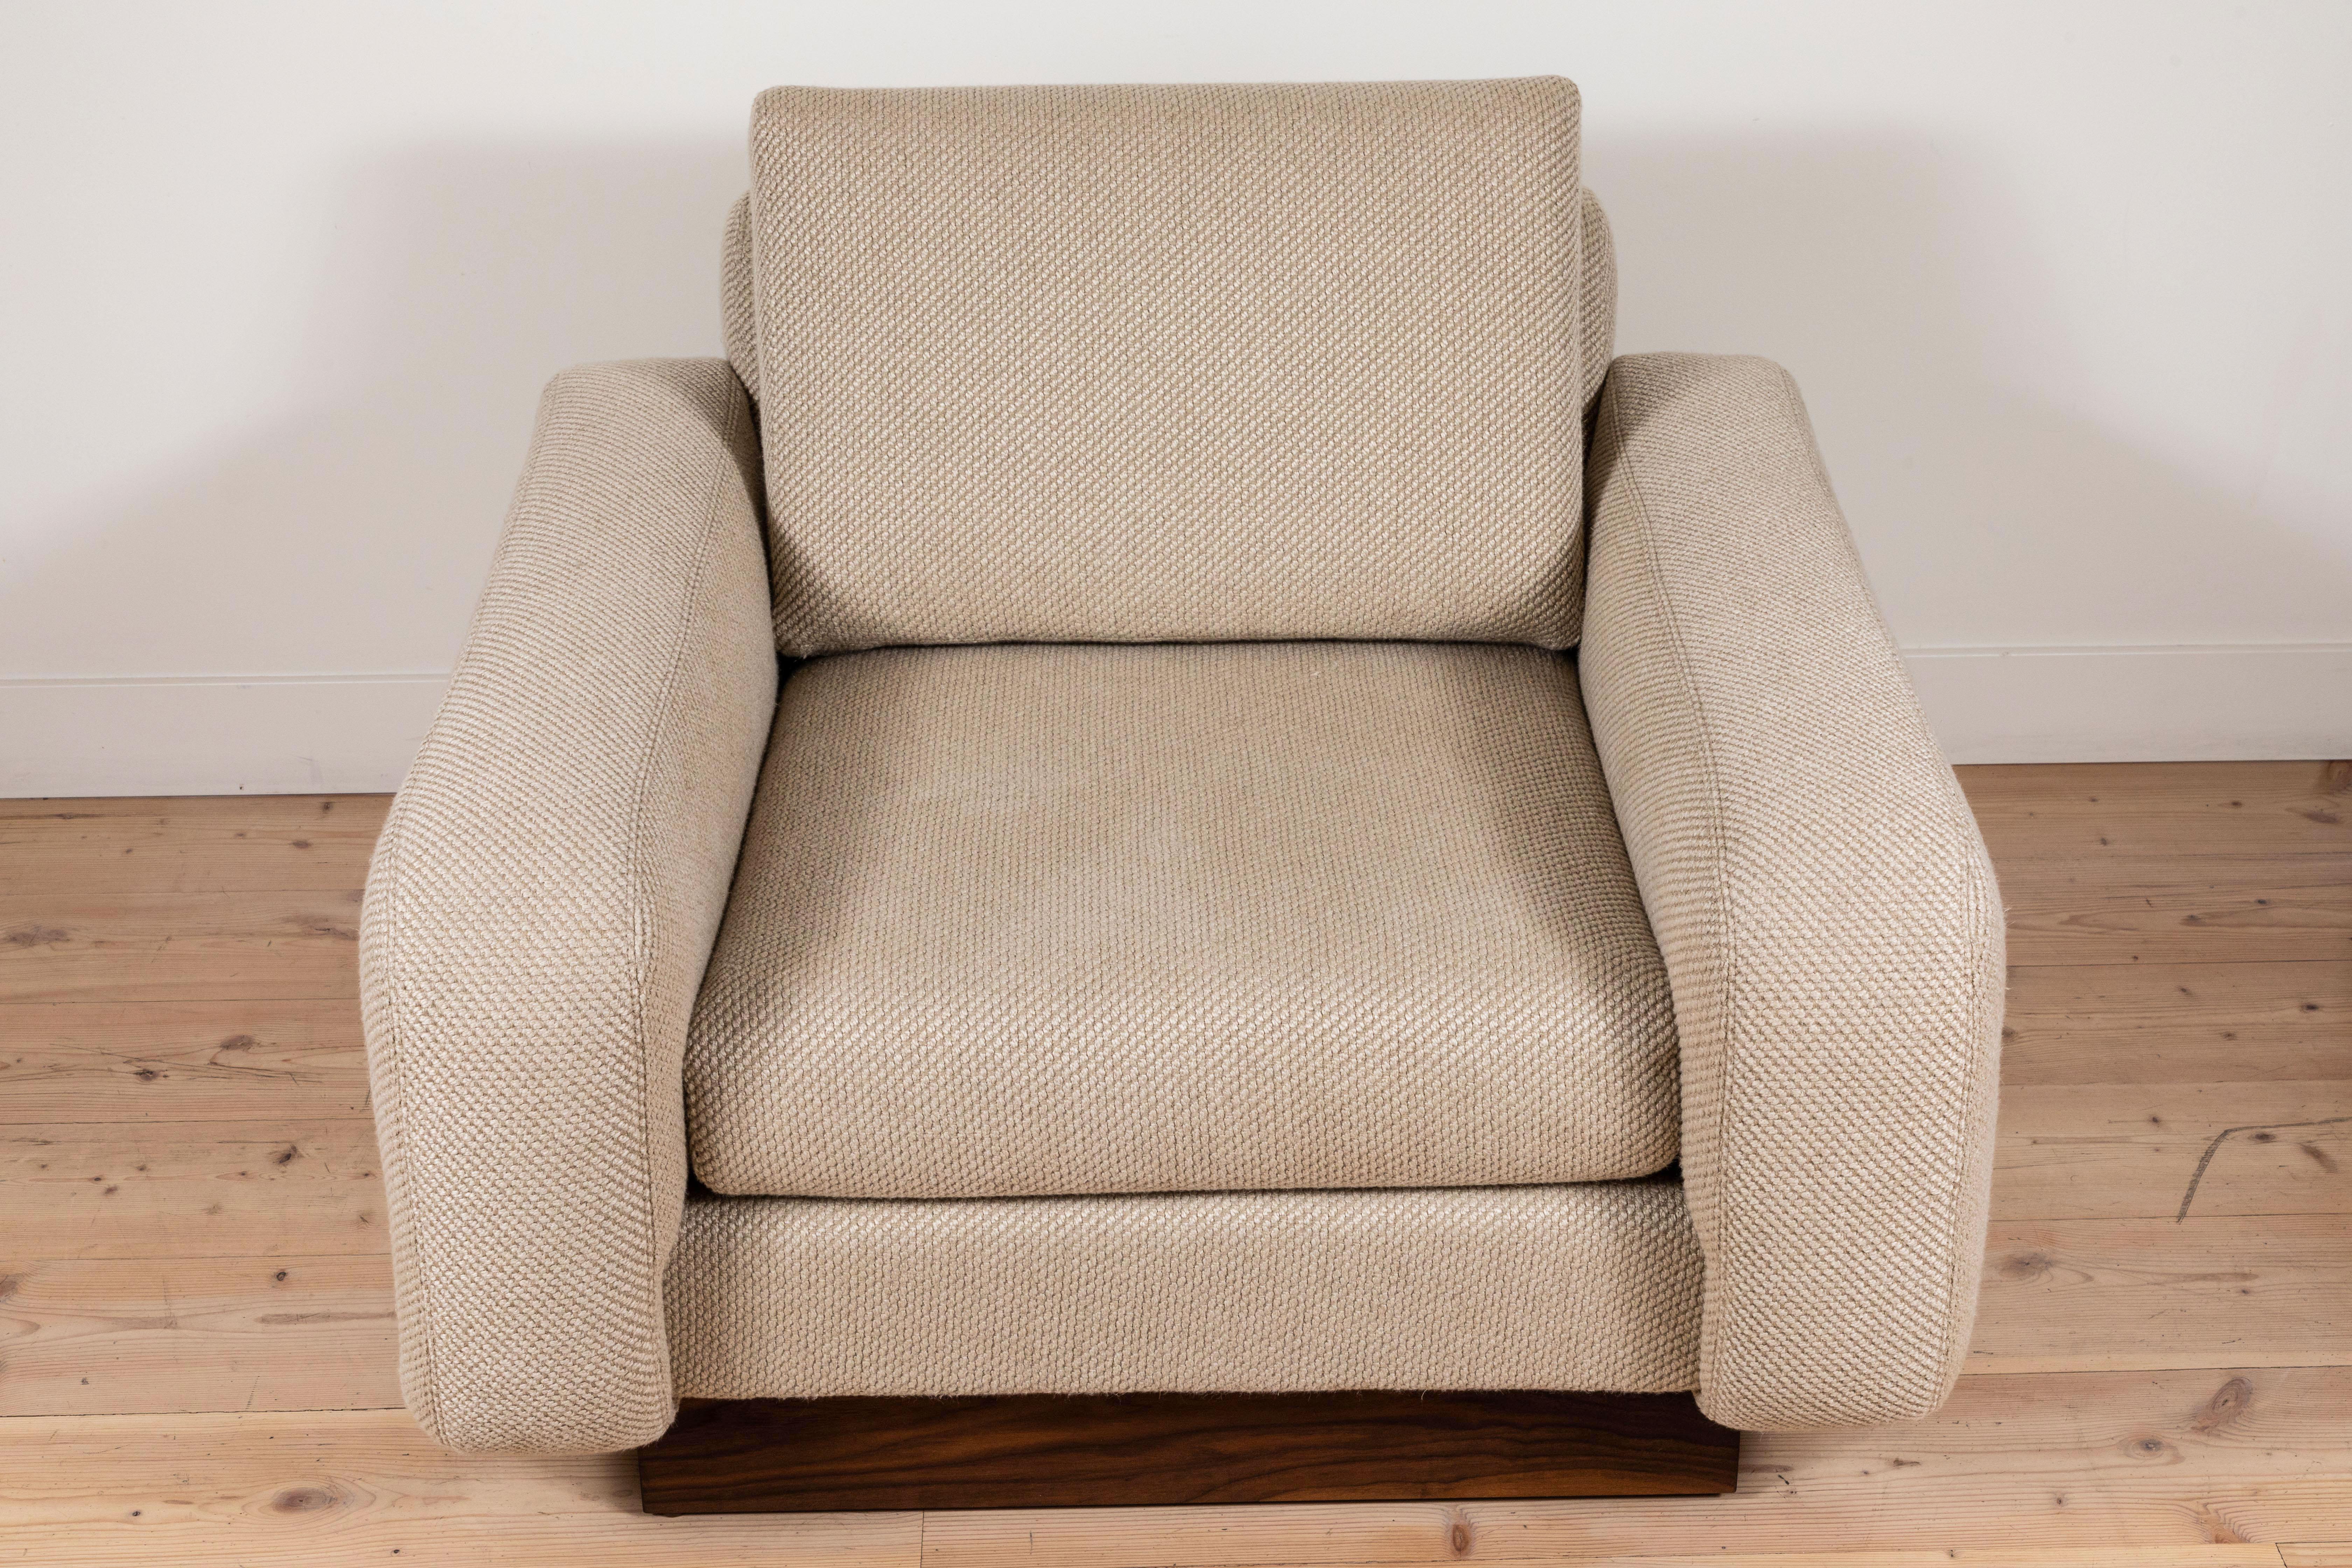 The Mesa lounge chair is a fully upholstered club chair that features a walnut or oak inset base.

Available to order in customer's own materials with a 6-8 week lead time.

As shown $2,800
To order: $1,850 + COM.